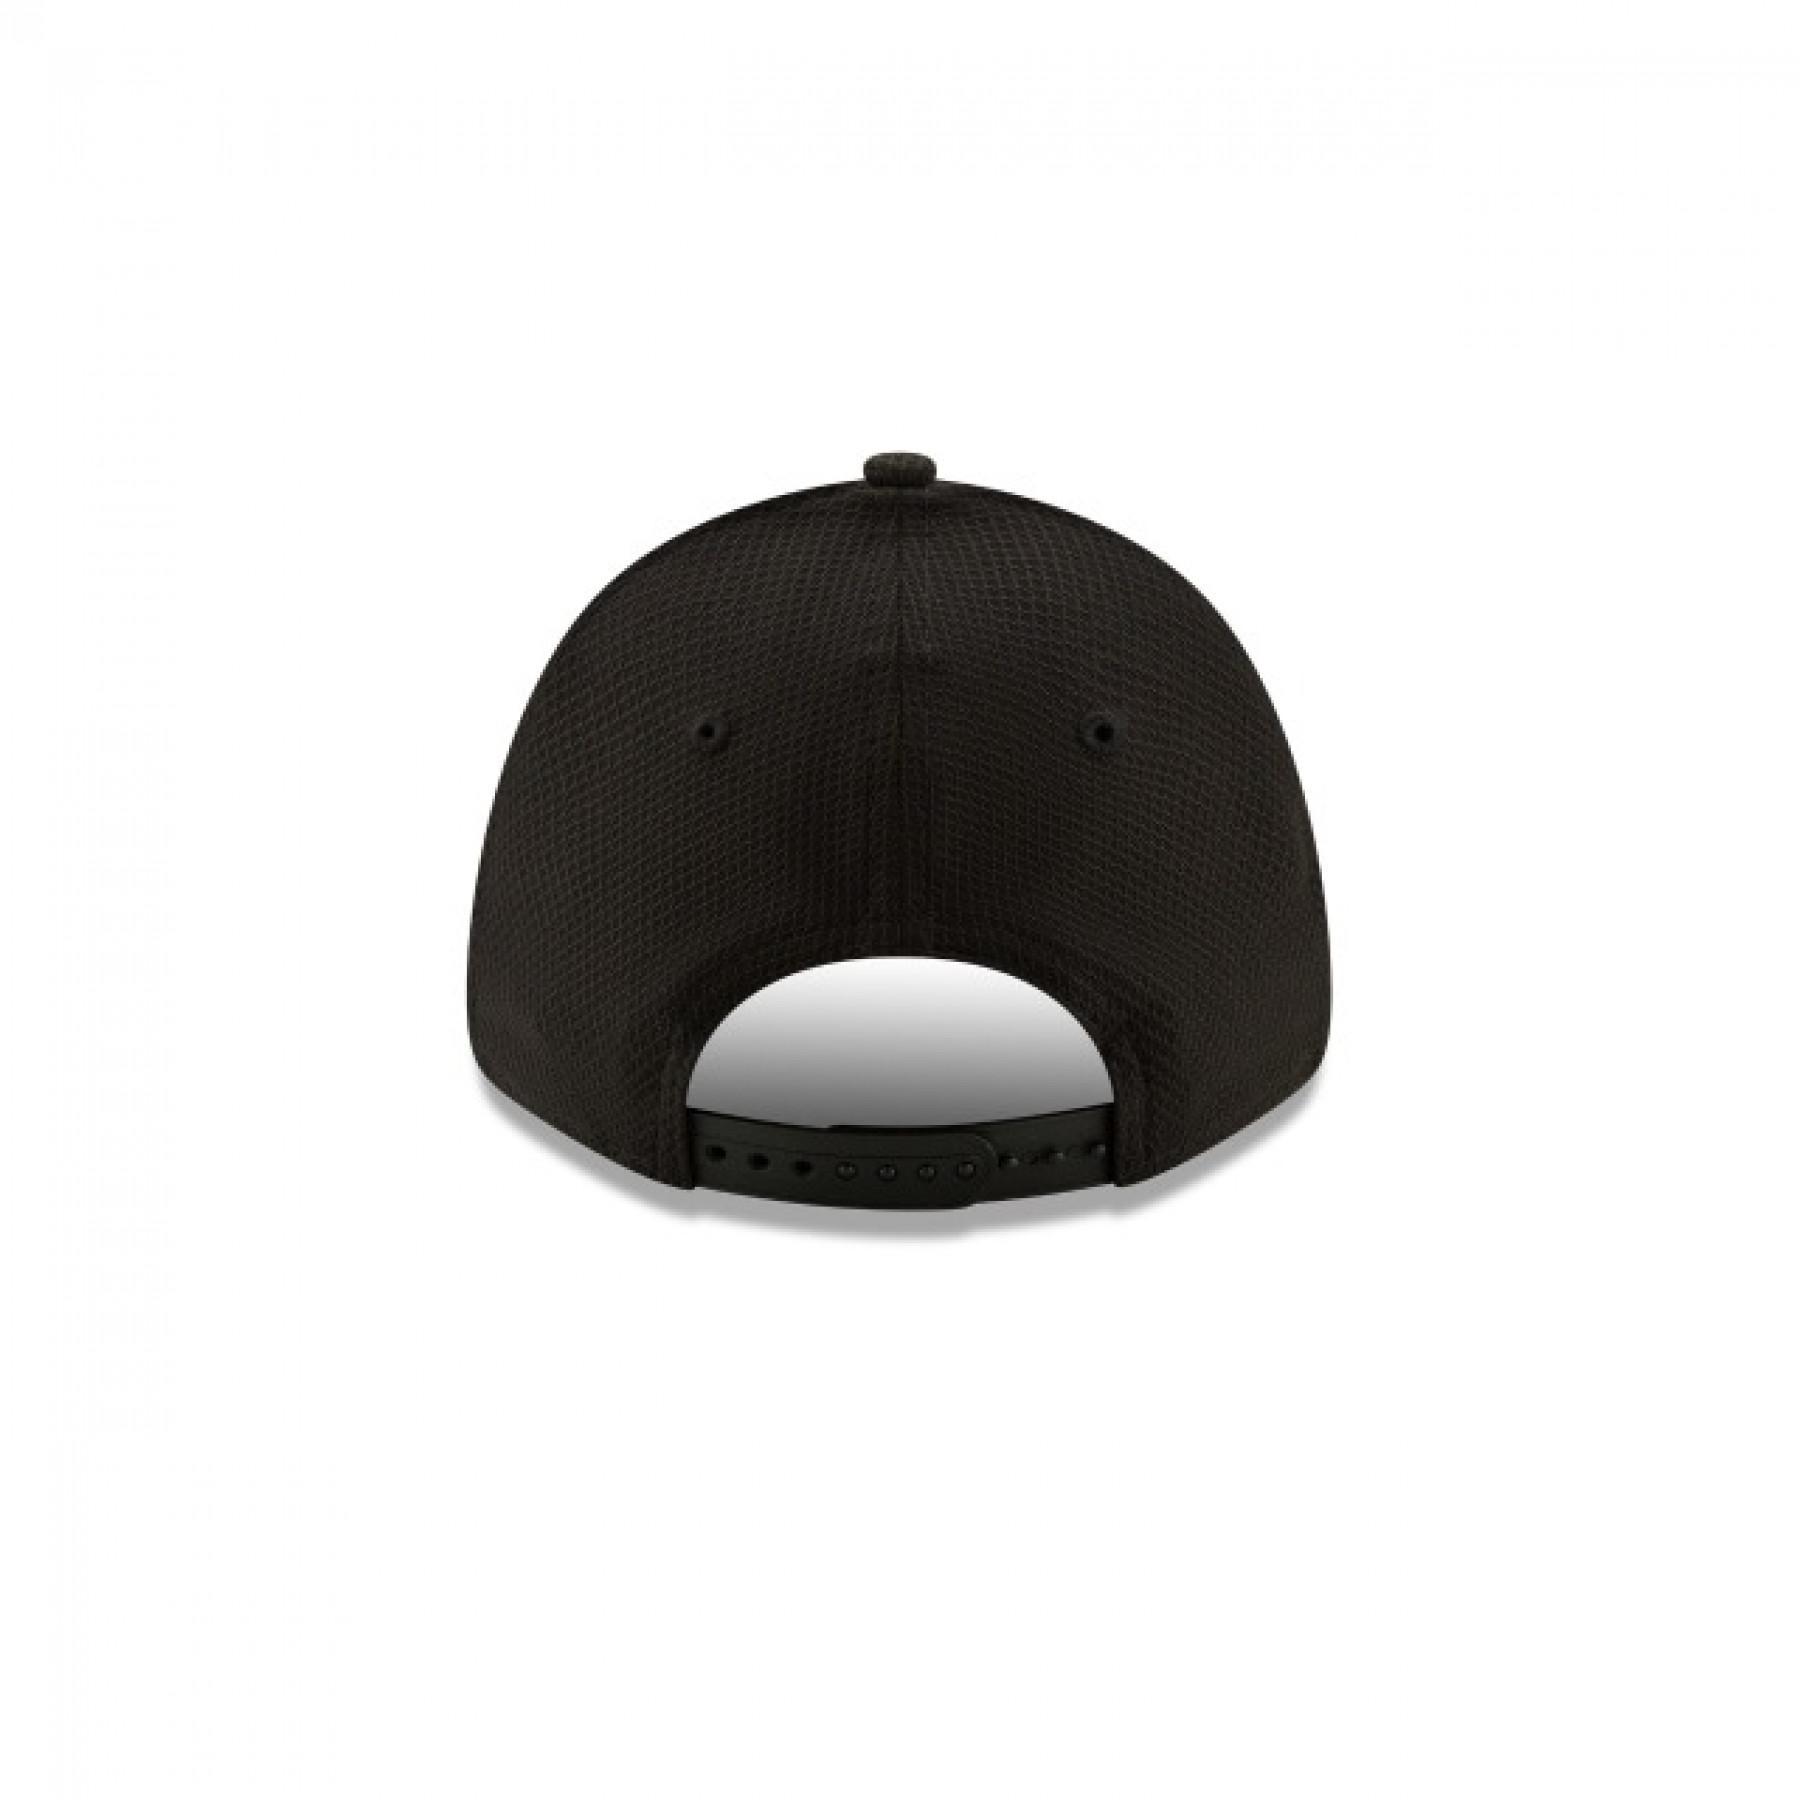 Casquette New Era Yankees Team Colour 9forty